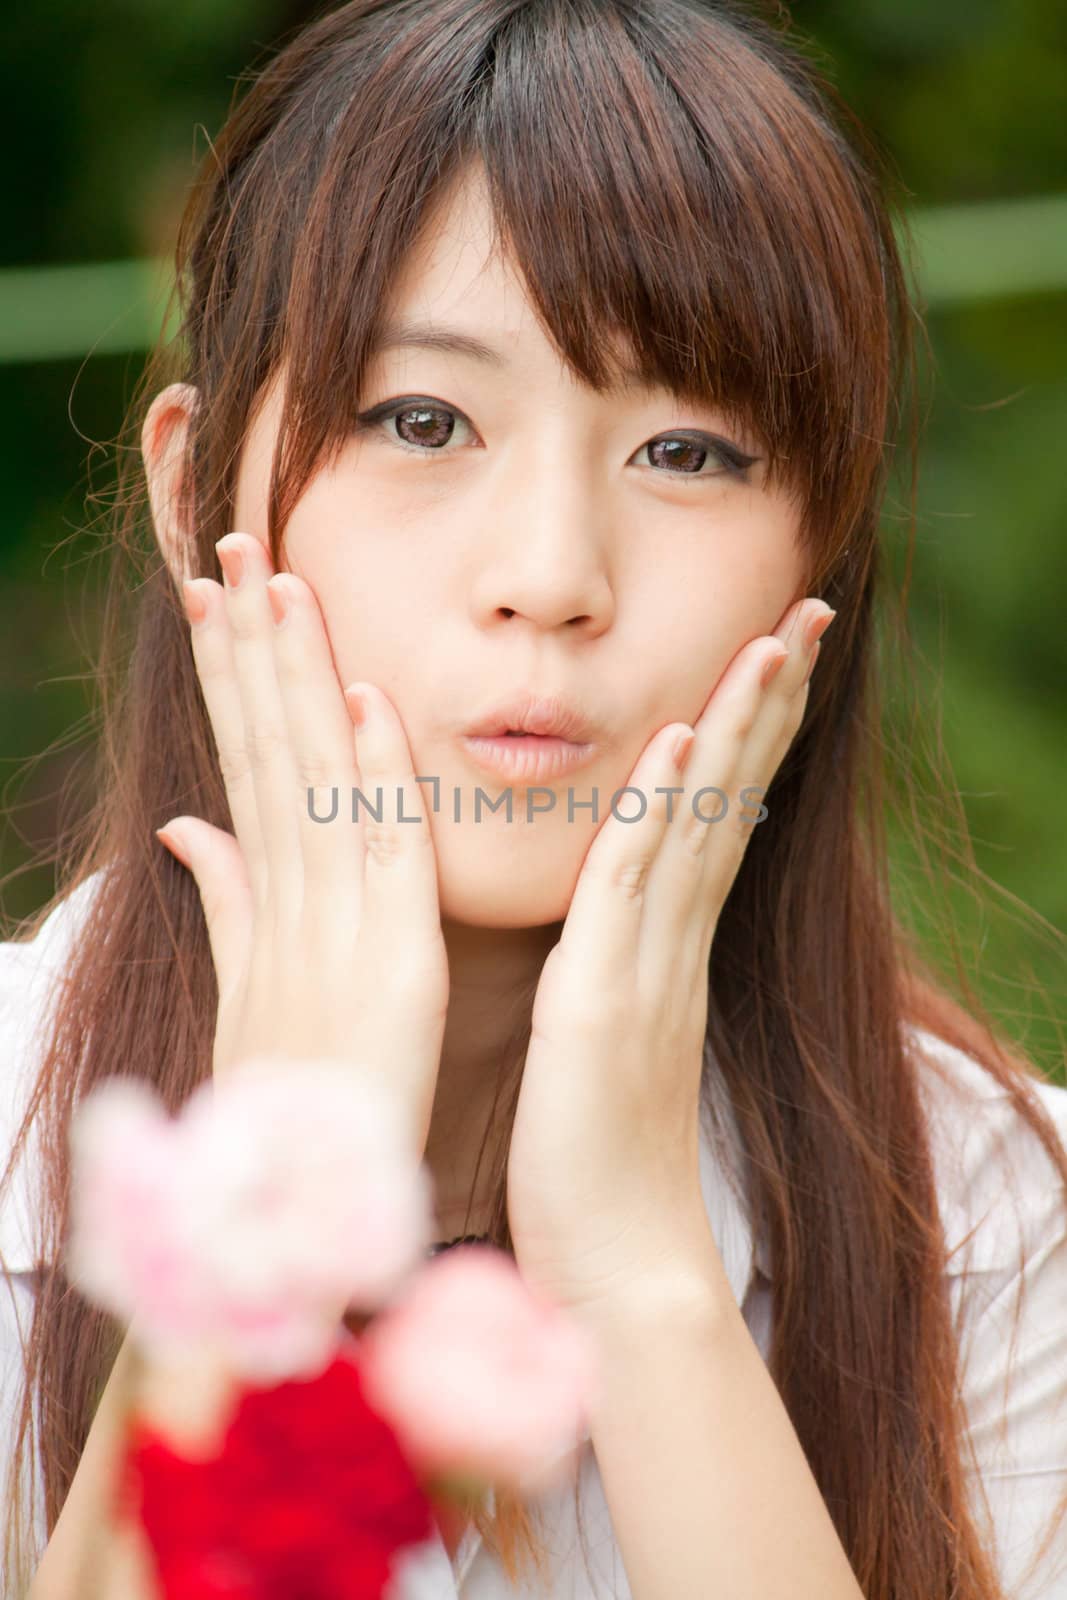 Young healthy Thai girl portrait in the park with flowers, focus at Model, hands on her cheek